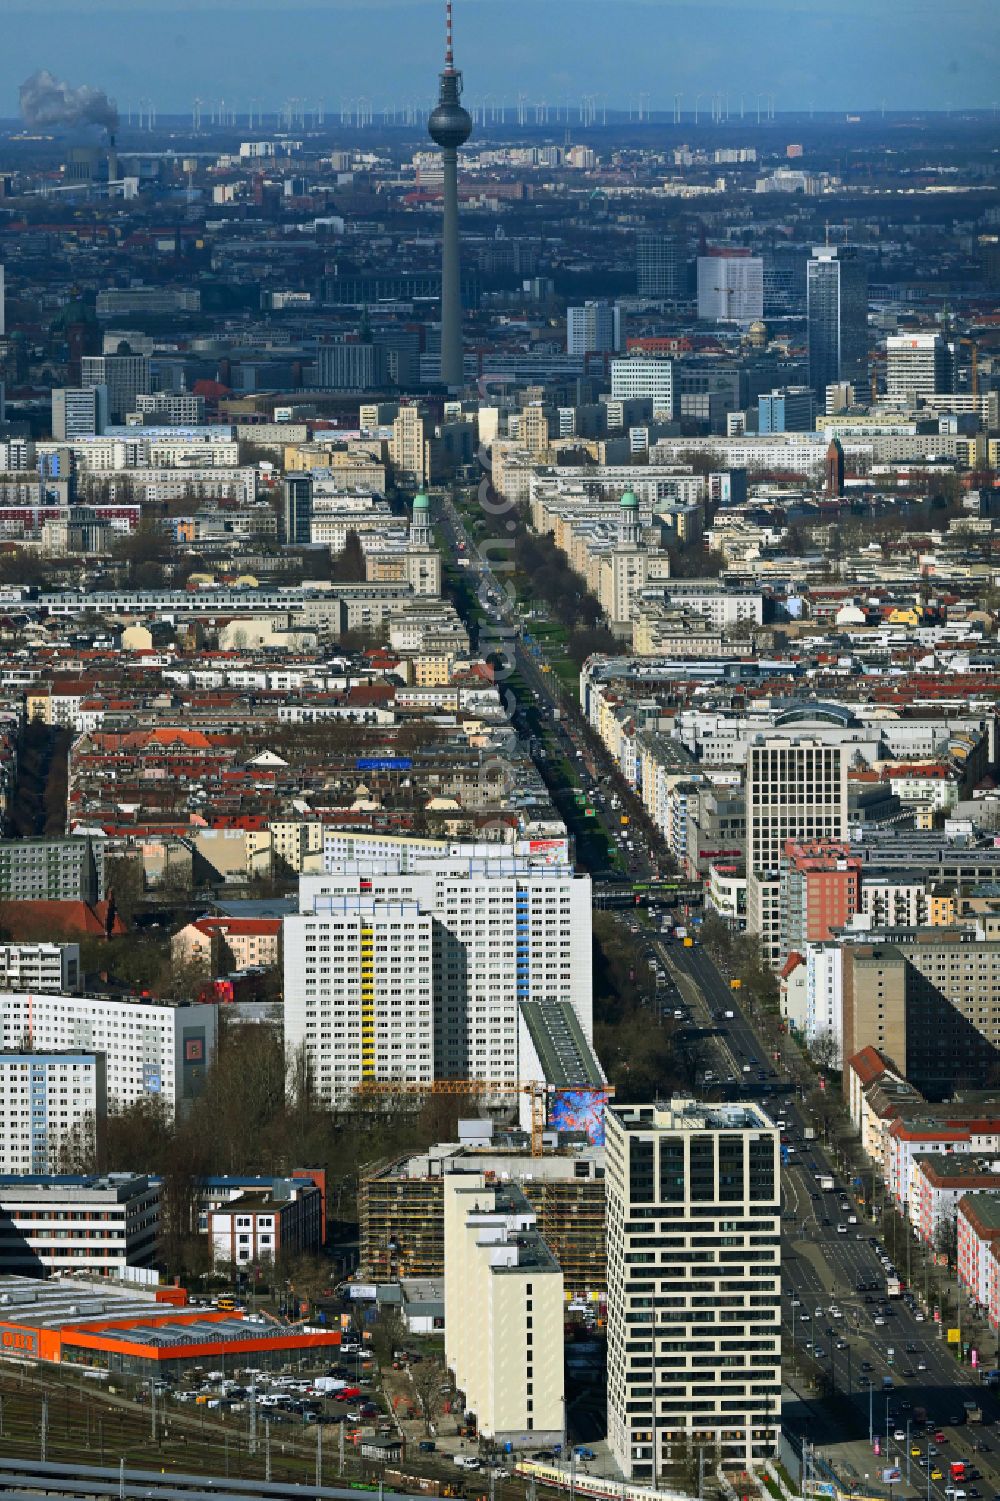 Aerial image Berlin - New high-rise building complex Q218 on Frankfurter Allee in the district Lichtenberg in Berlin, Germany